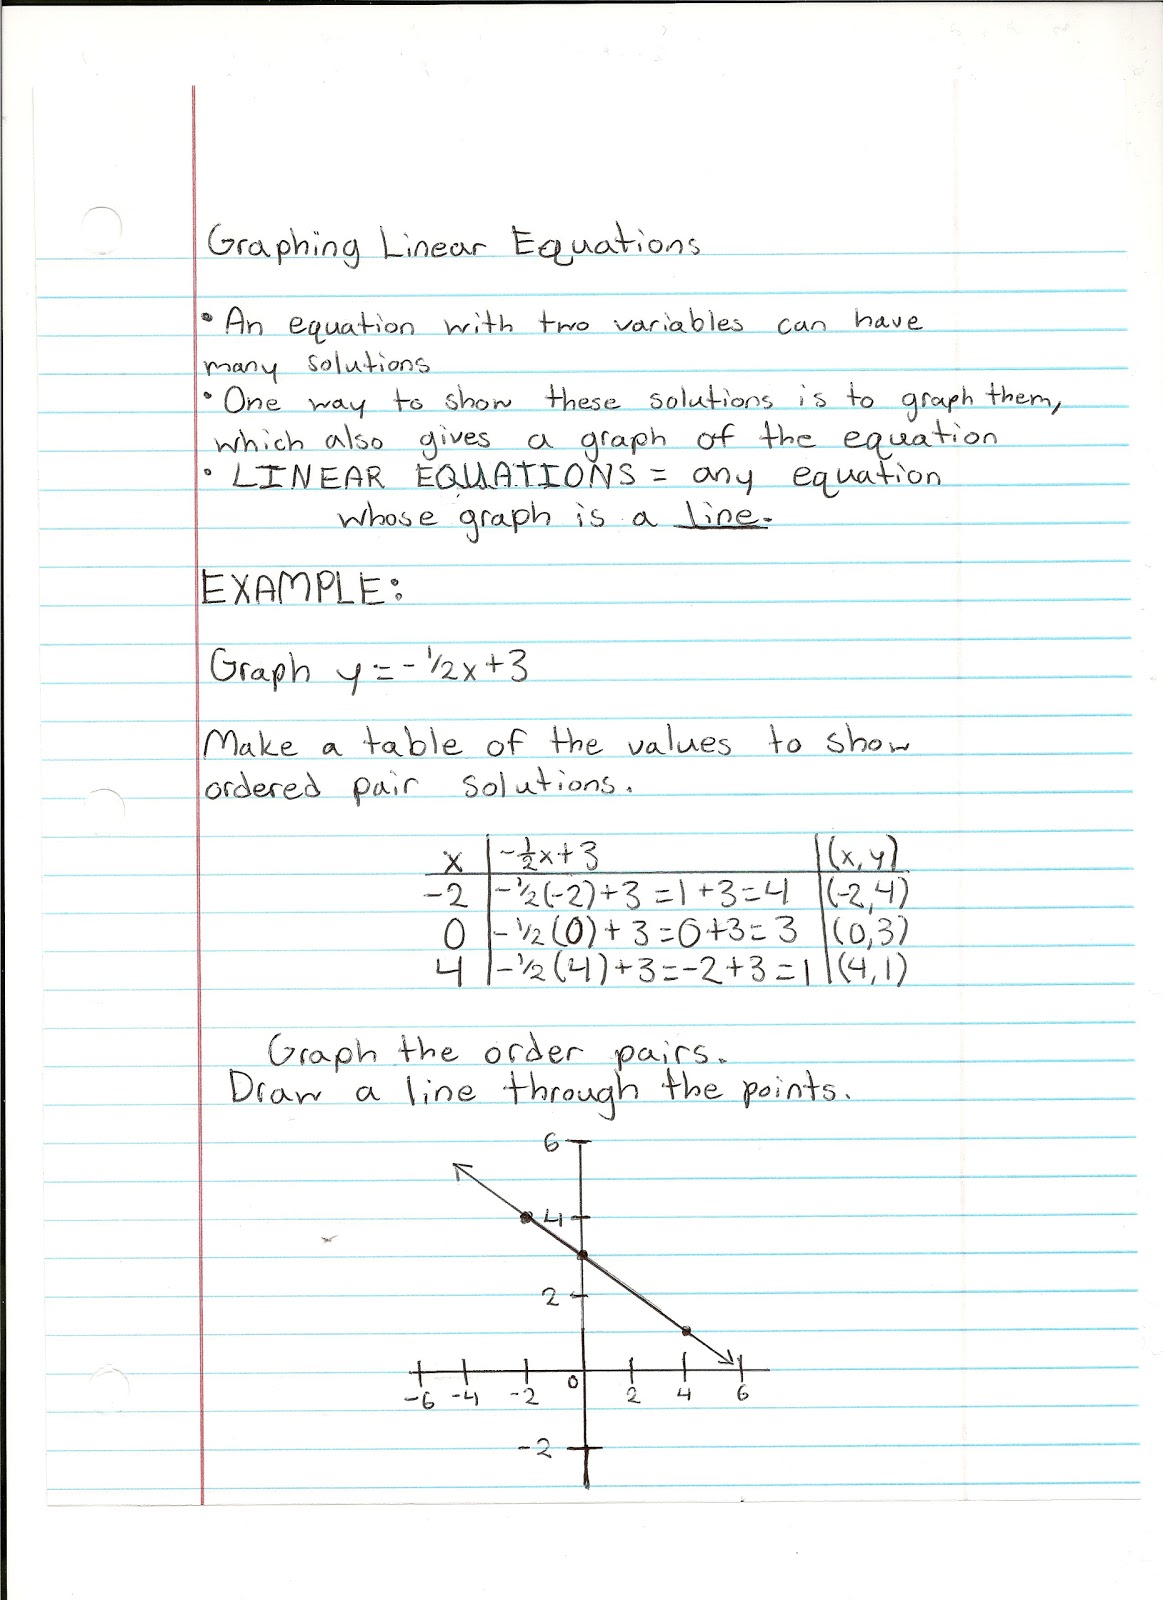 Math Notes: Graphing Linear Equations